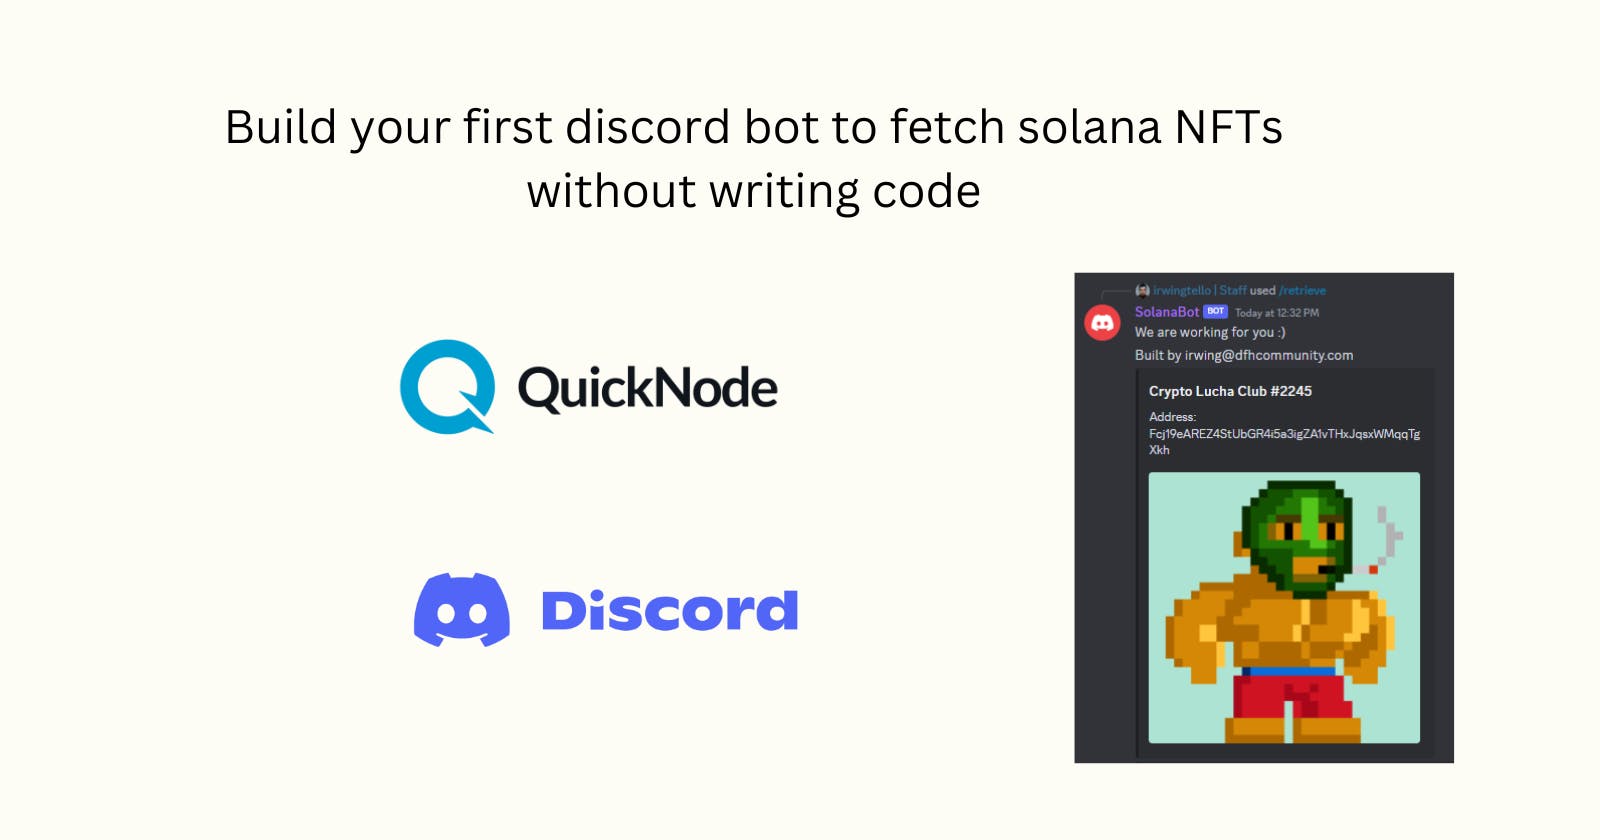 Build your first discord bot to fetch solana NFTs without writing code